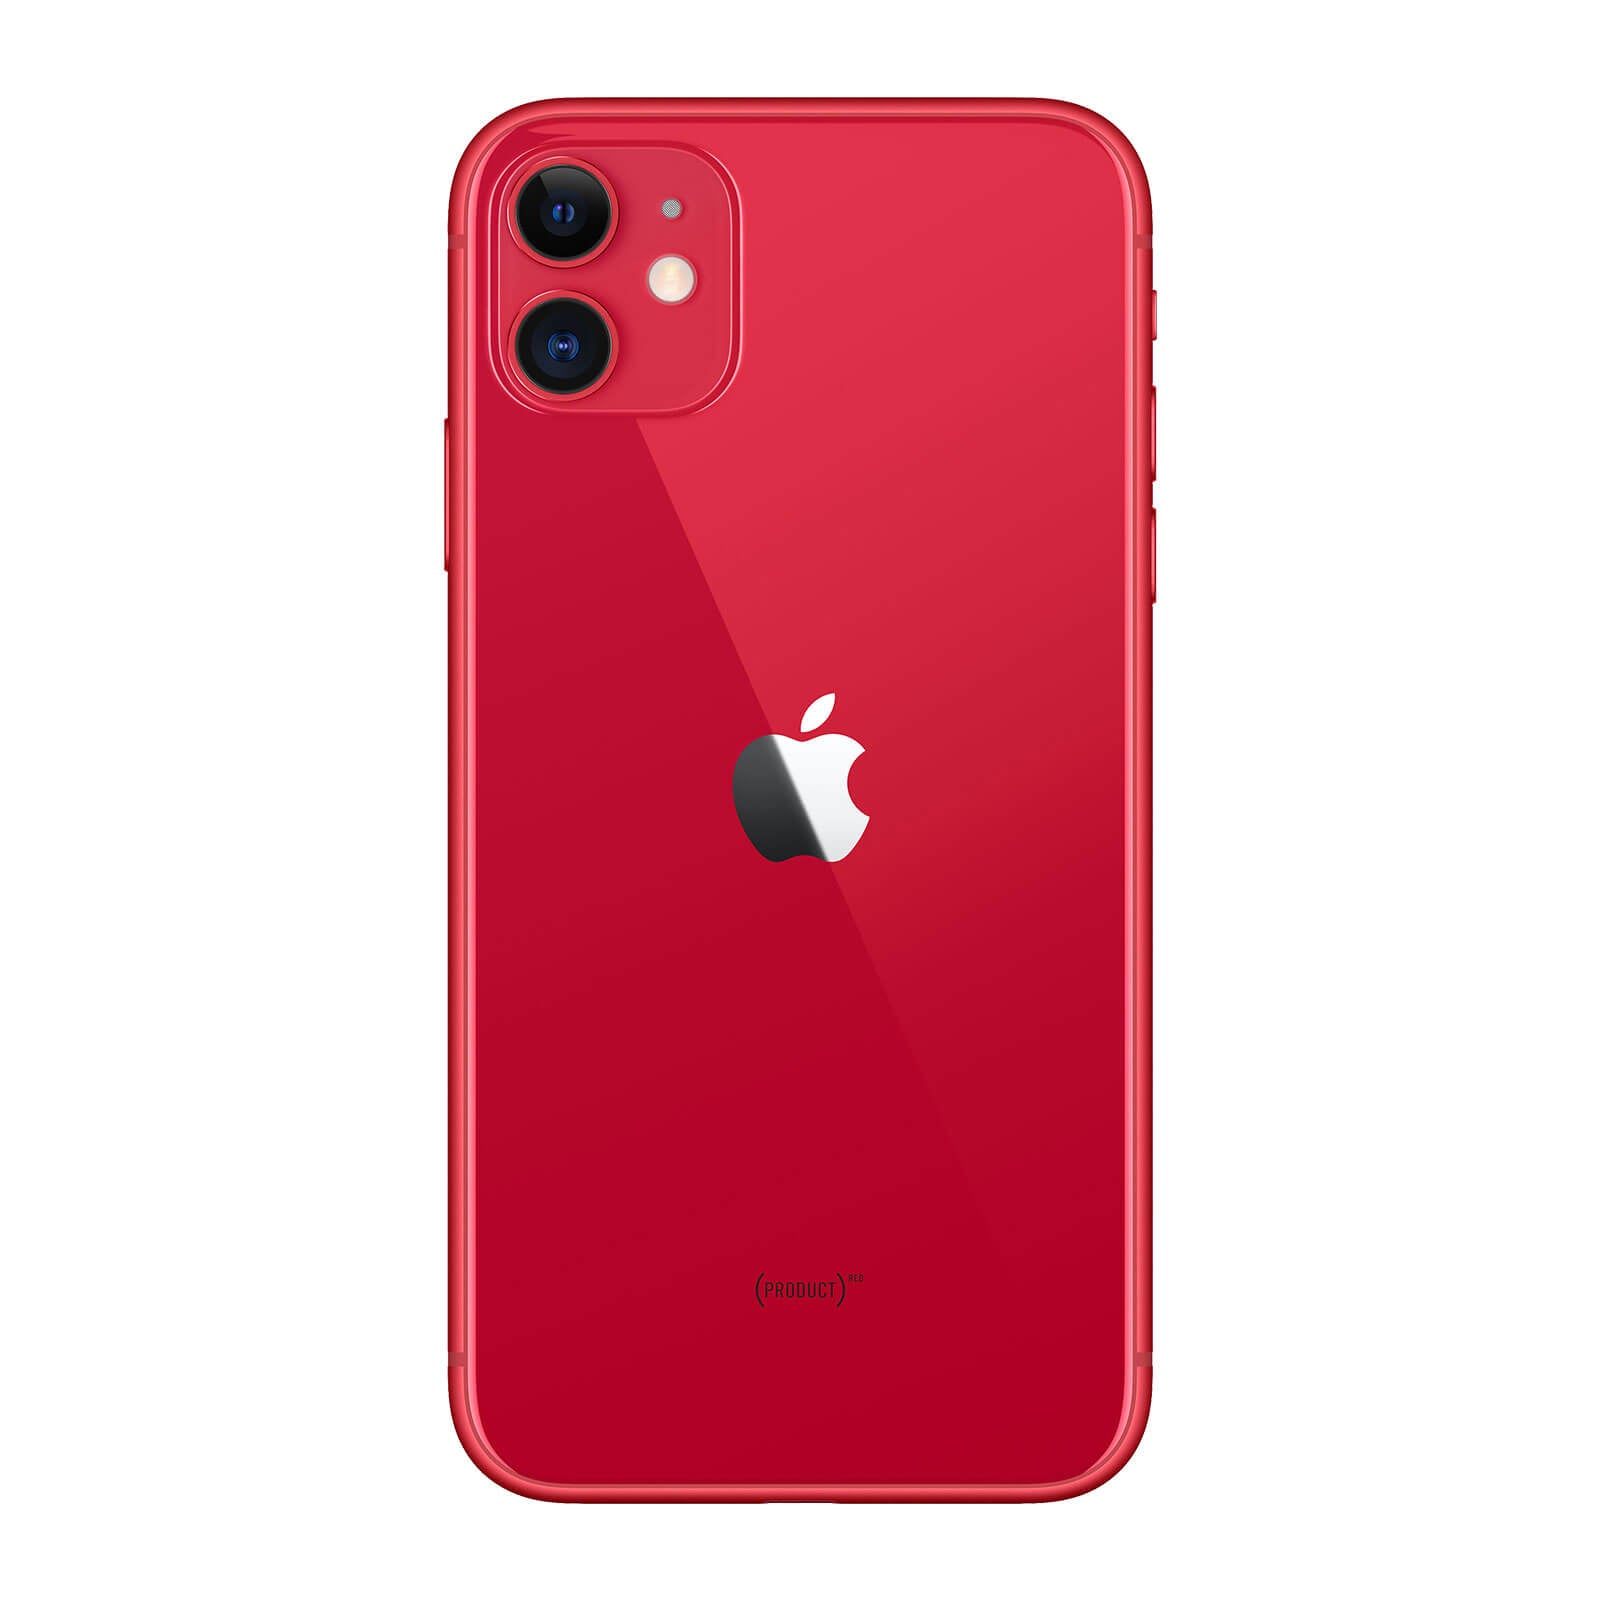 Apple iPhone 11 64GB Product Red Pristine - T-Mobile